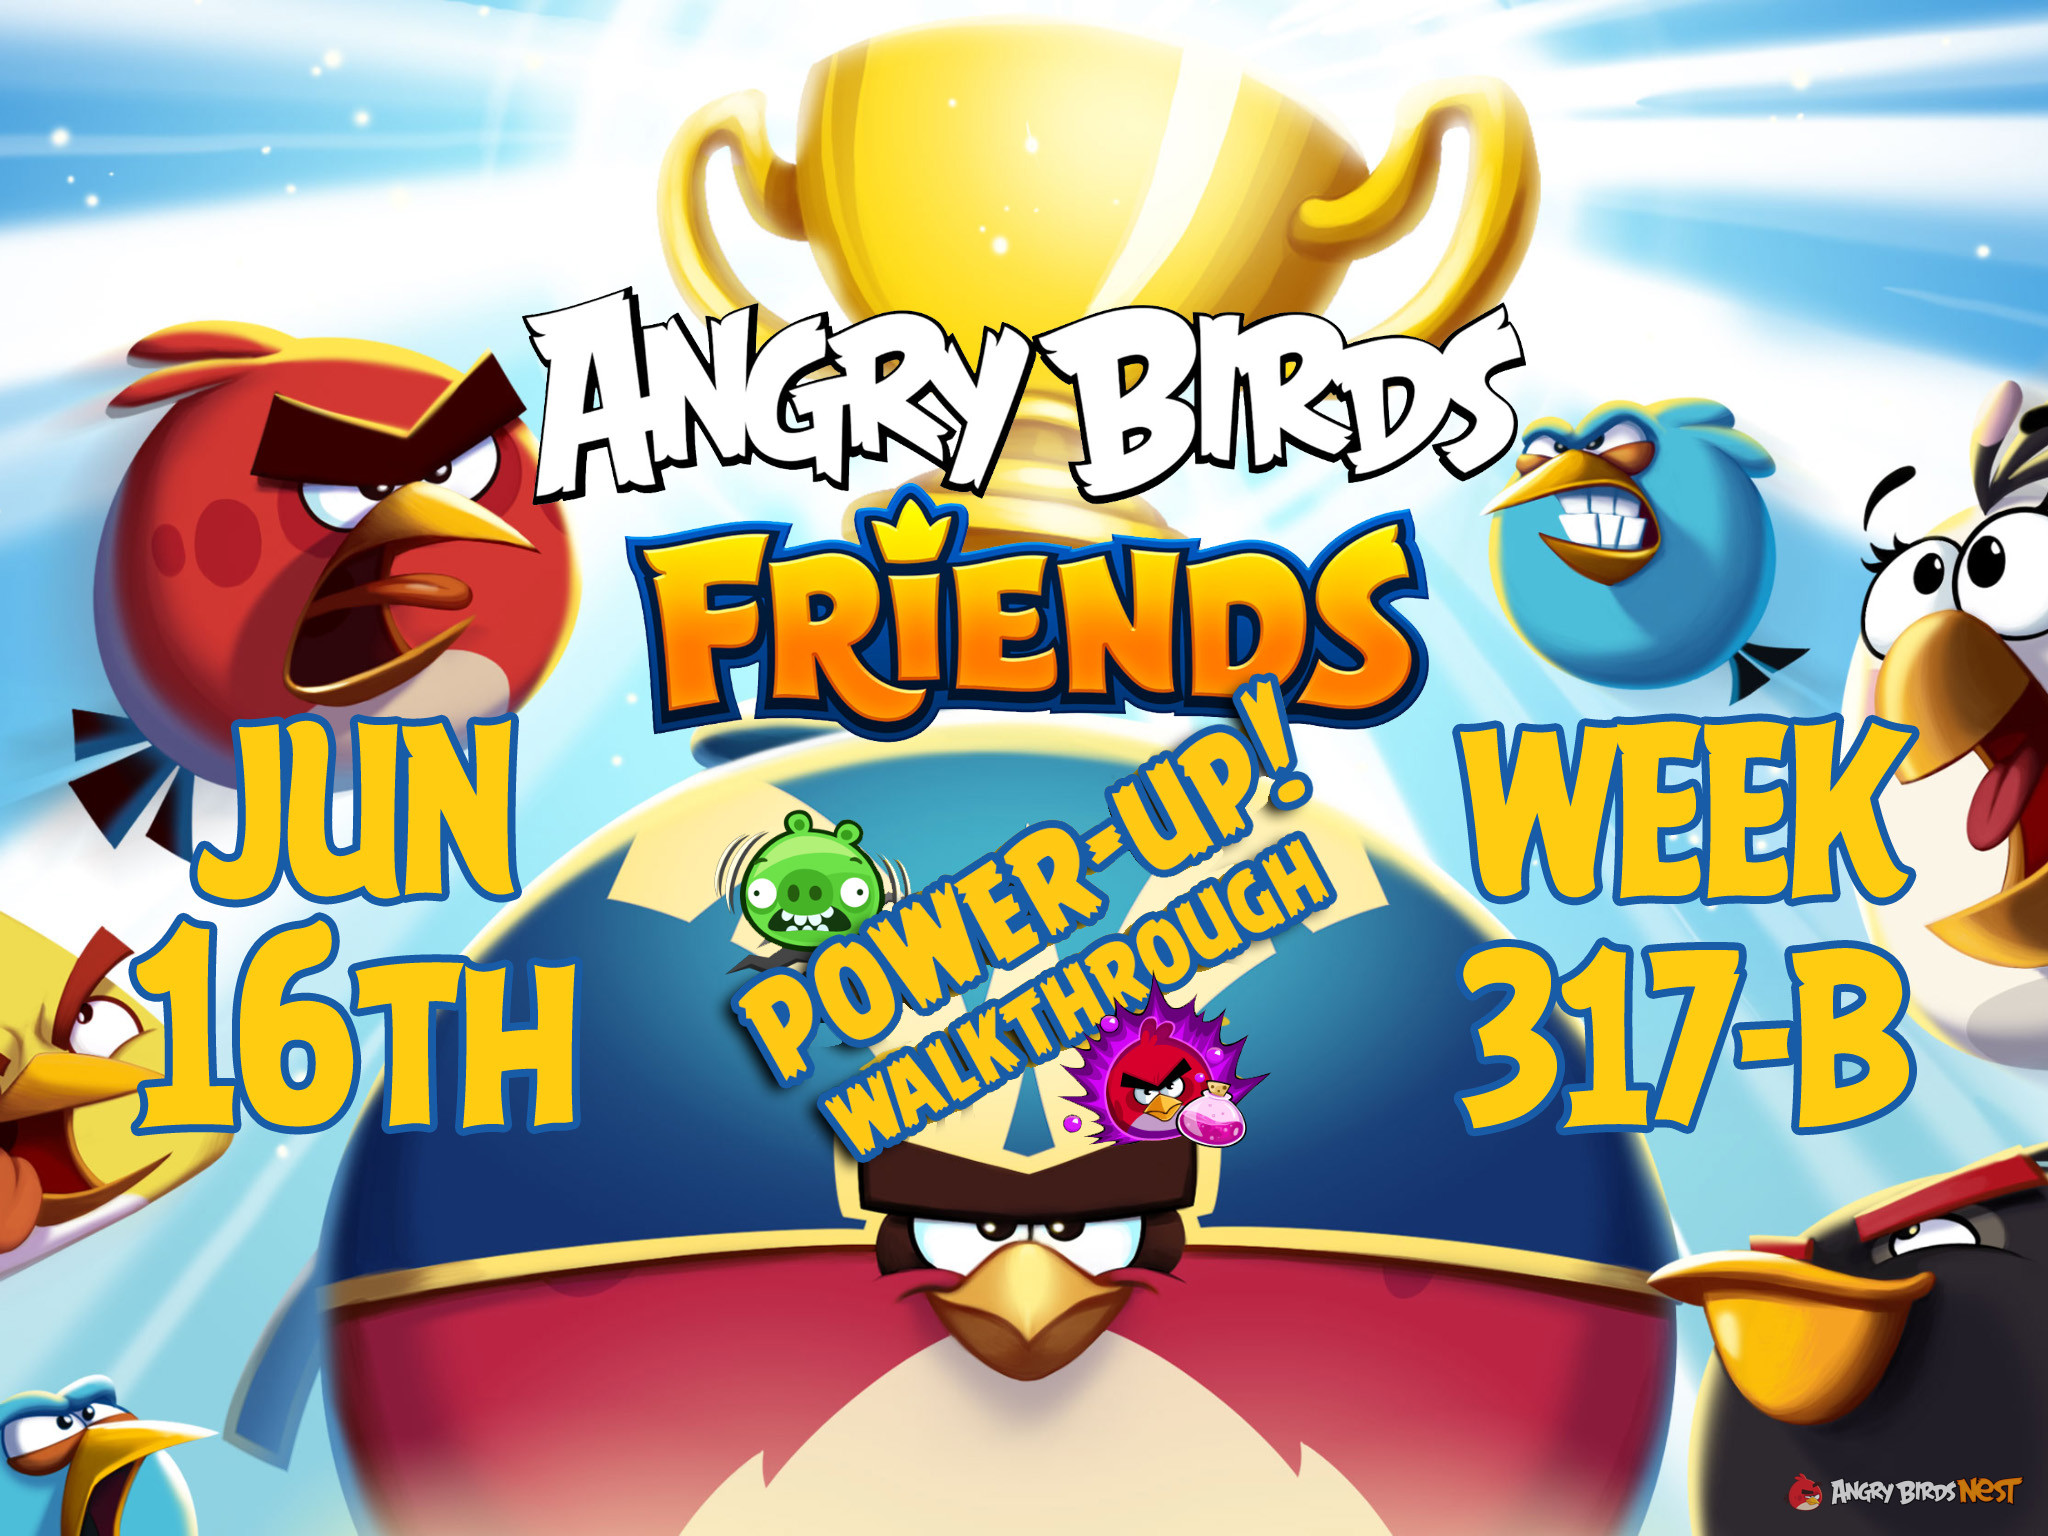 Angry-Birds-Friends-Tournament-Week-317-B-Feature-Image-PU